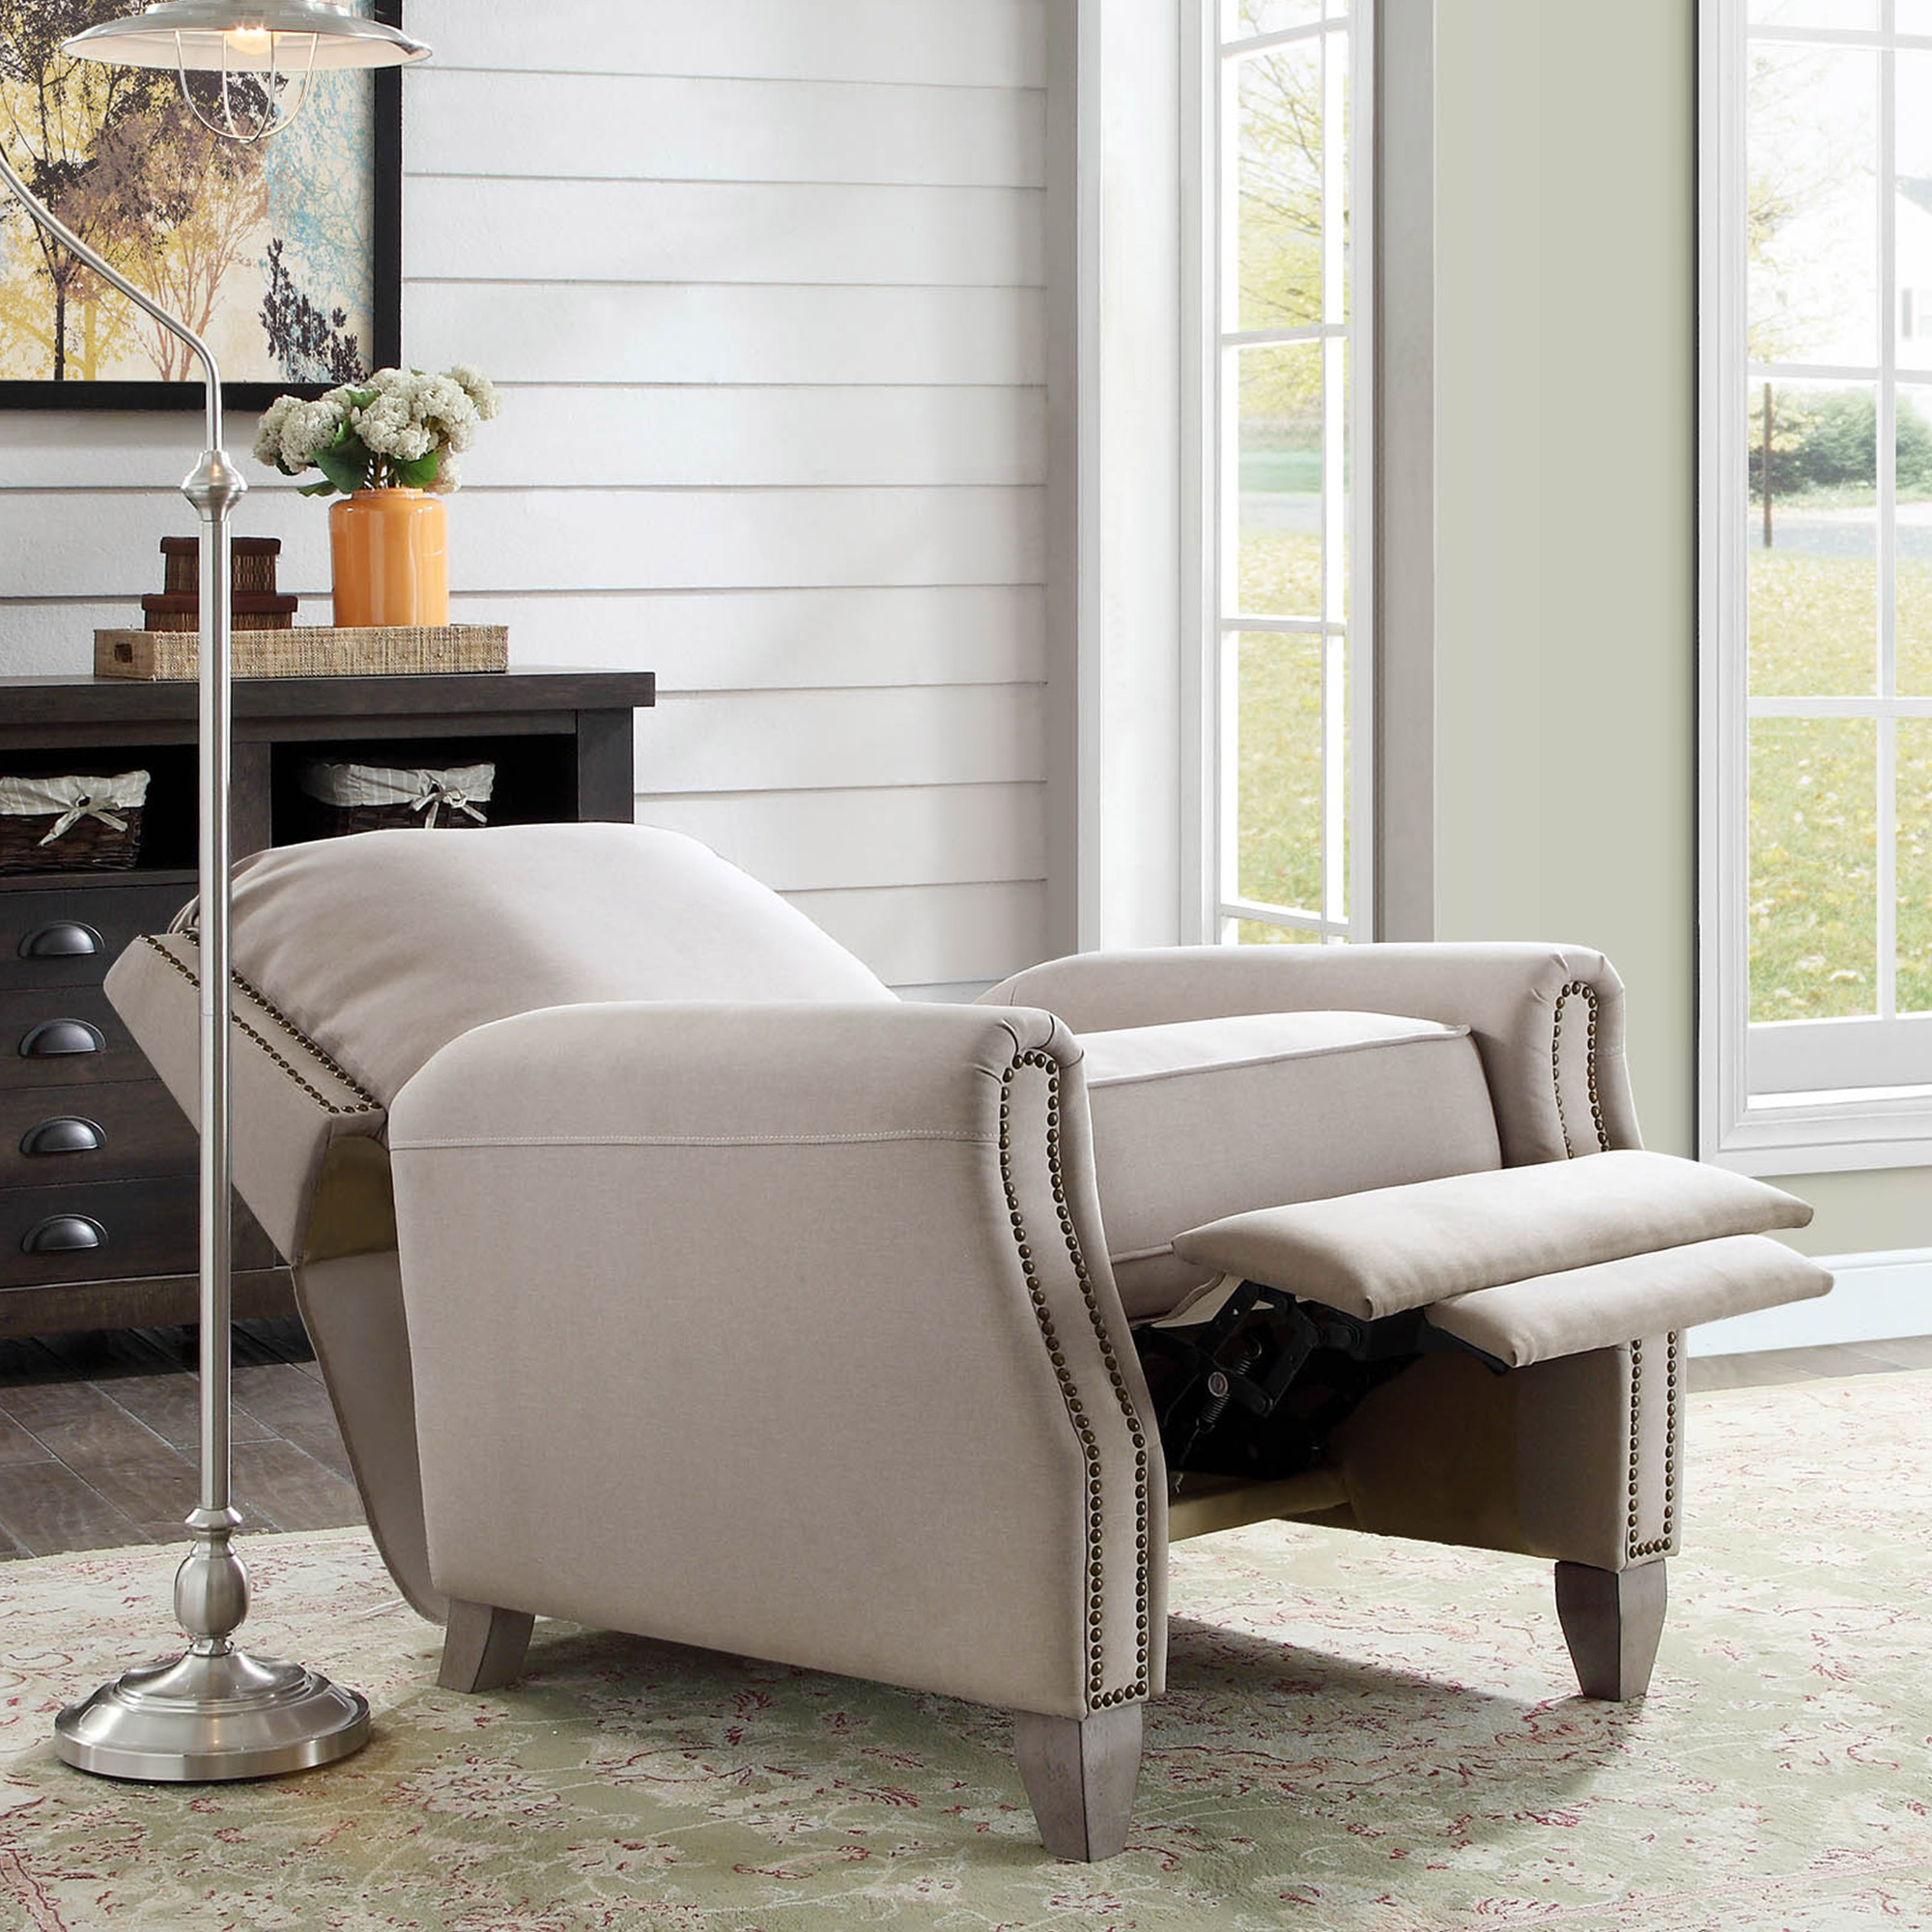 Better Homes and Gardens Pushback Recliner, Taupe Fabric Upholstery - image 2 of 7